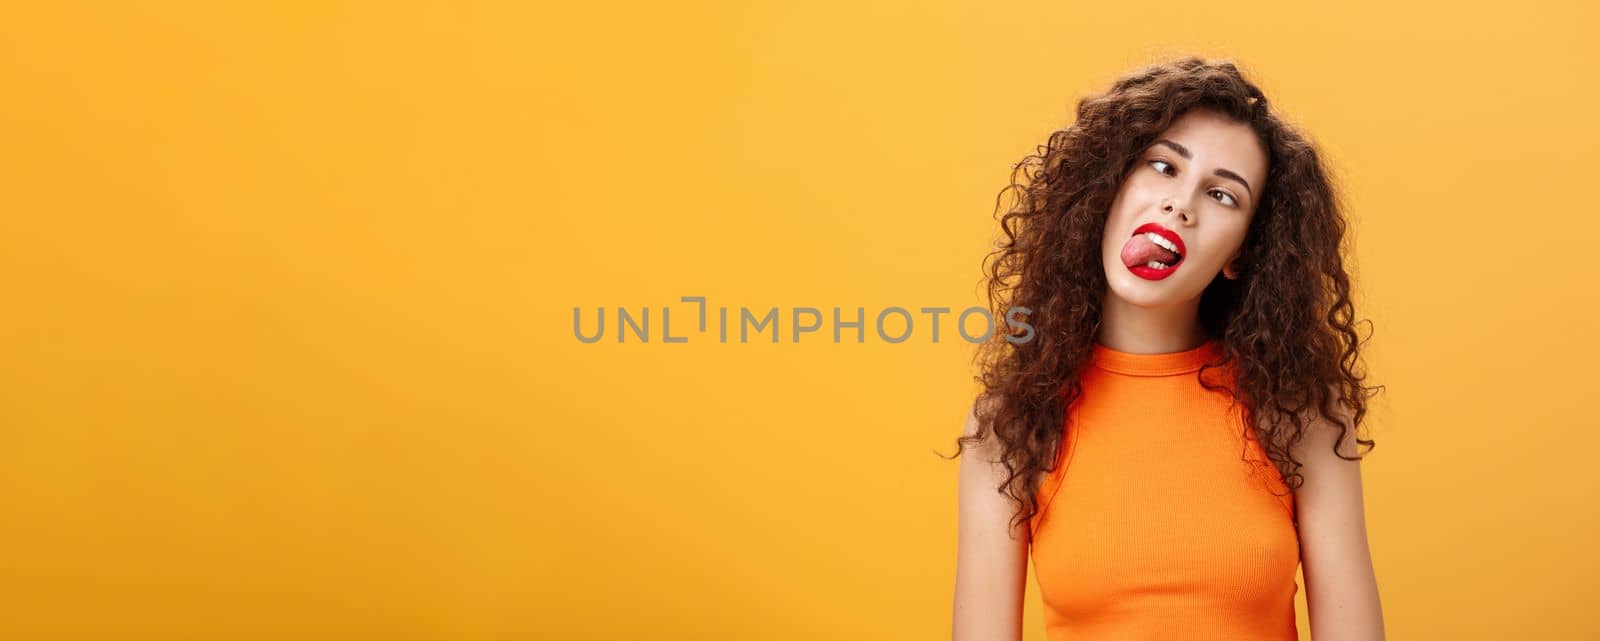 Girl fooling around carefree. feeling bored trying amuse herself during boring meeting sticking out tongue squinting and tilting head behaving childish and immature posing over orange background.